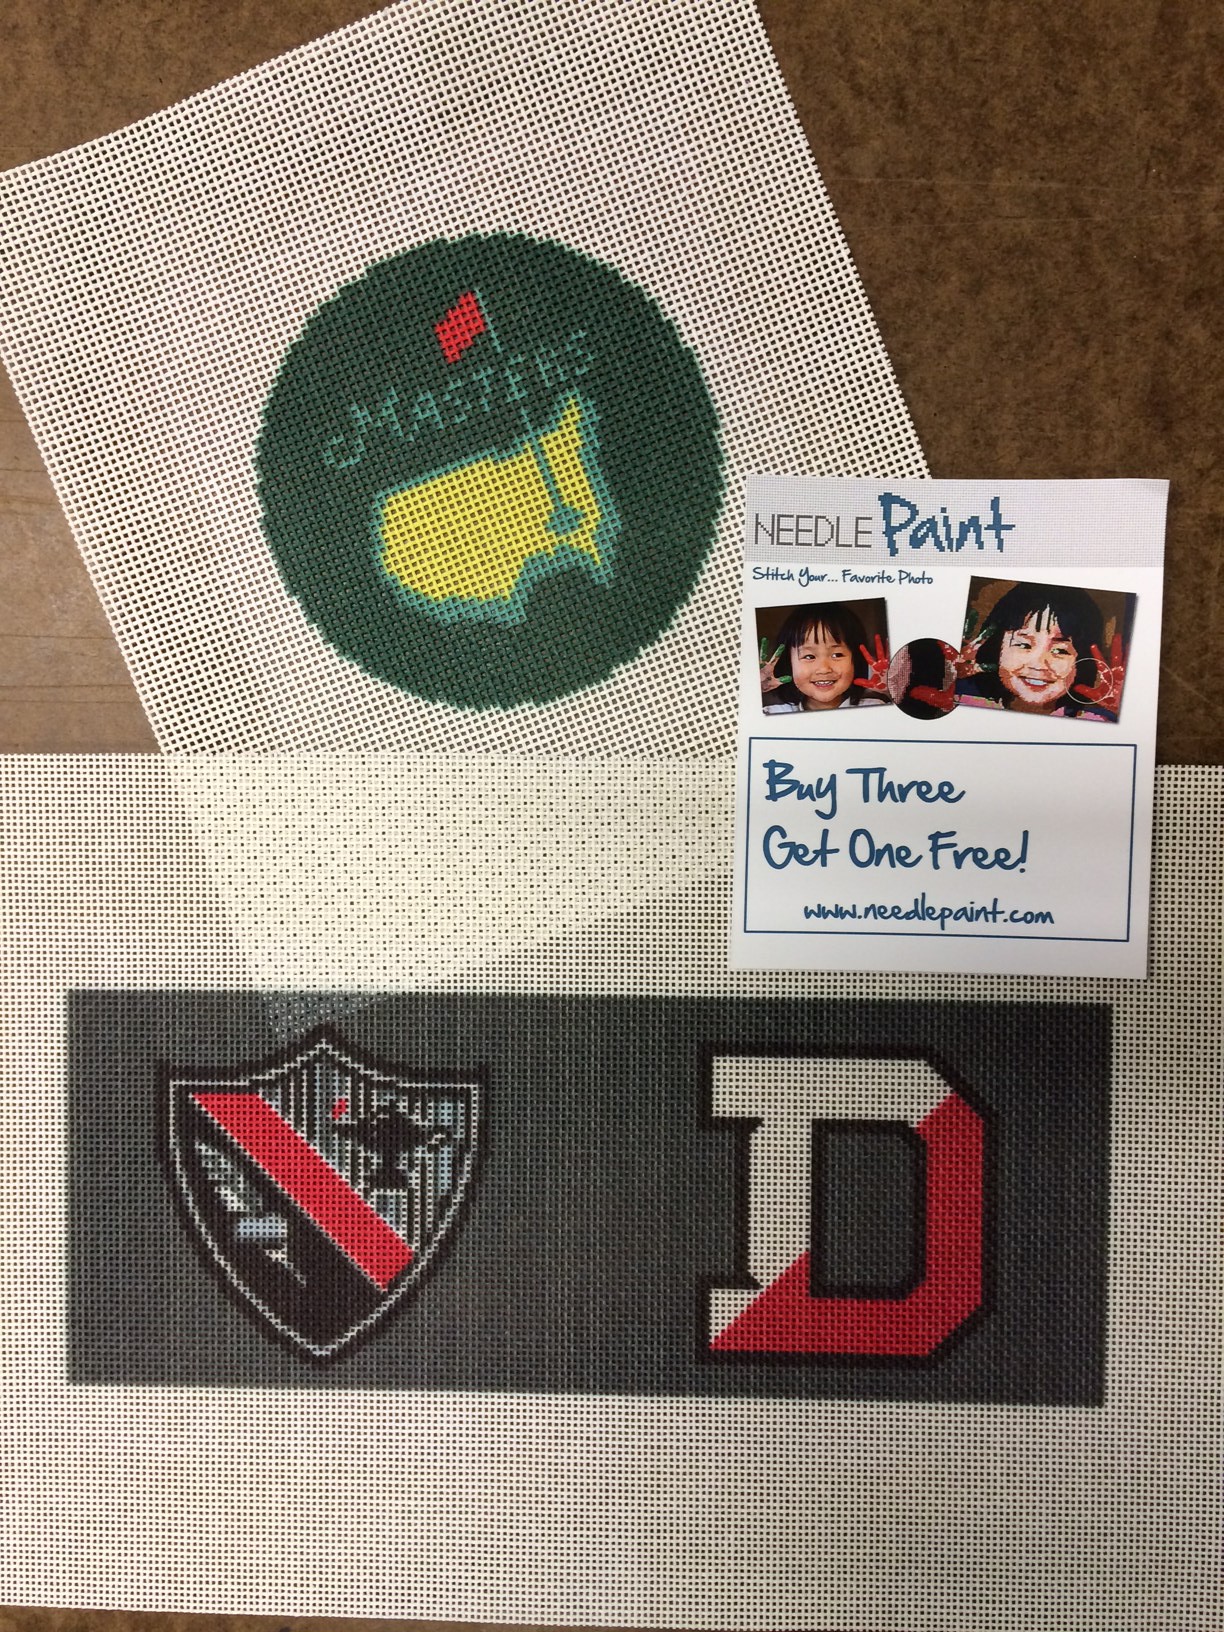 Custom Coaster and College Crest Needlepoint Canvas